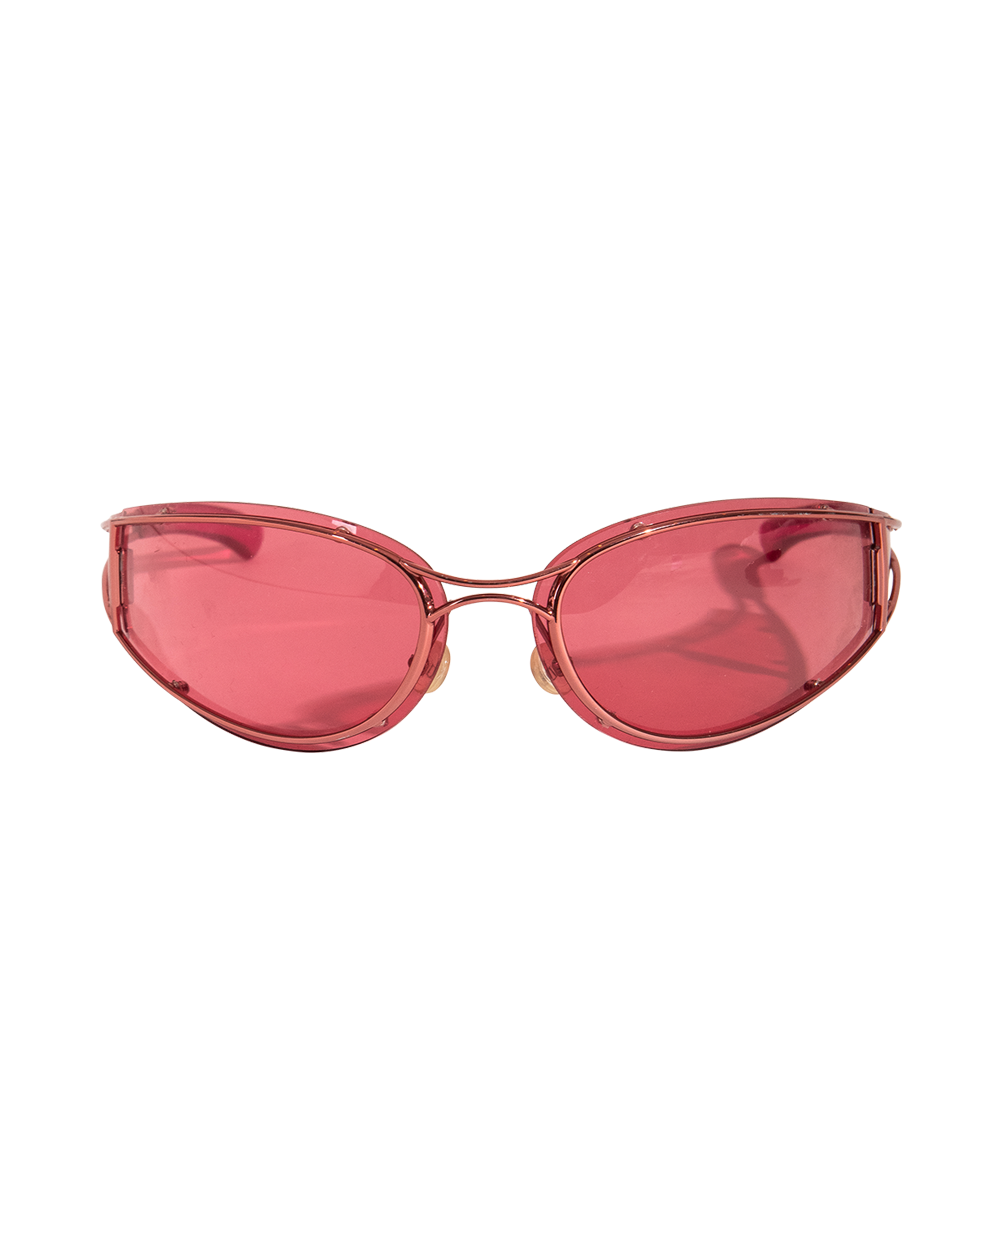 S/S 2001 'Trailer Park Chic' Collection Pink Sunglasses